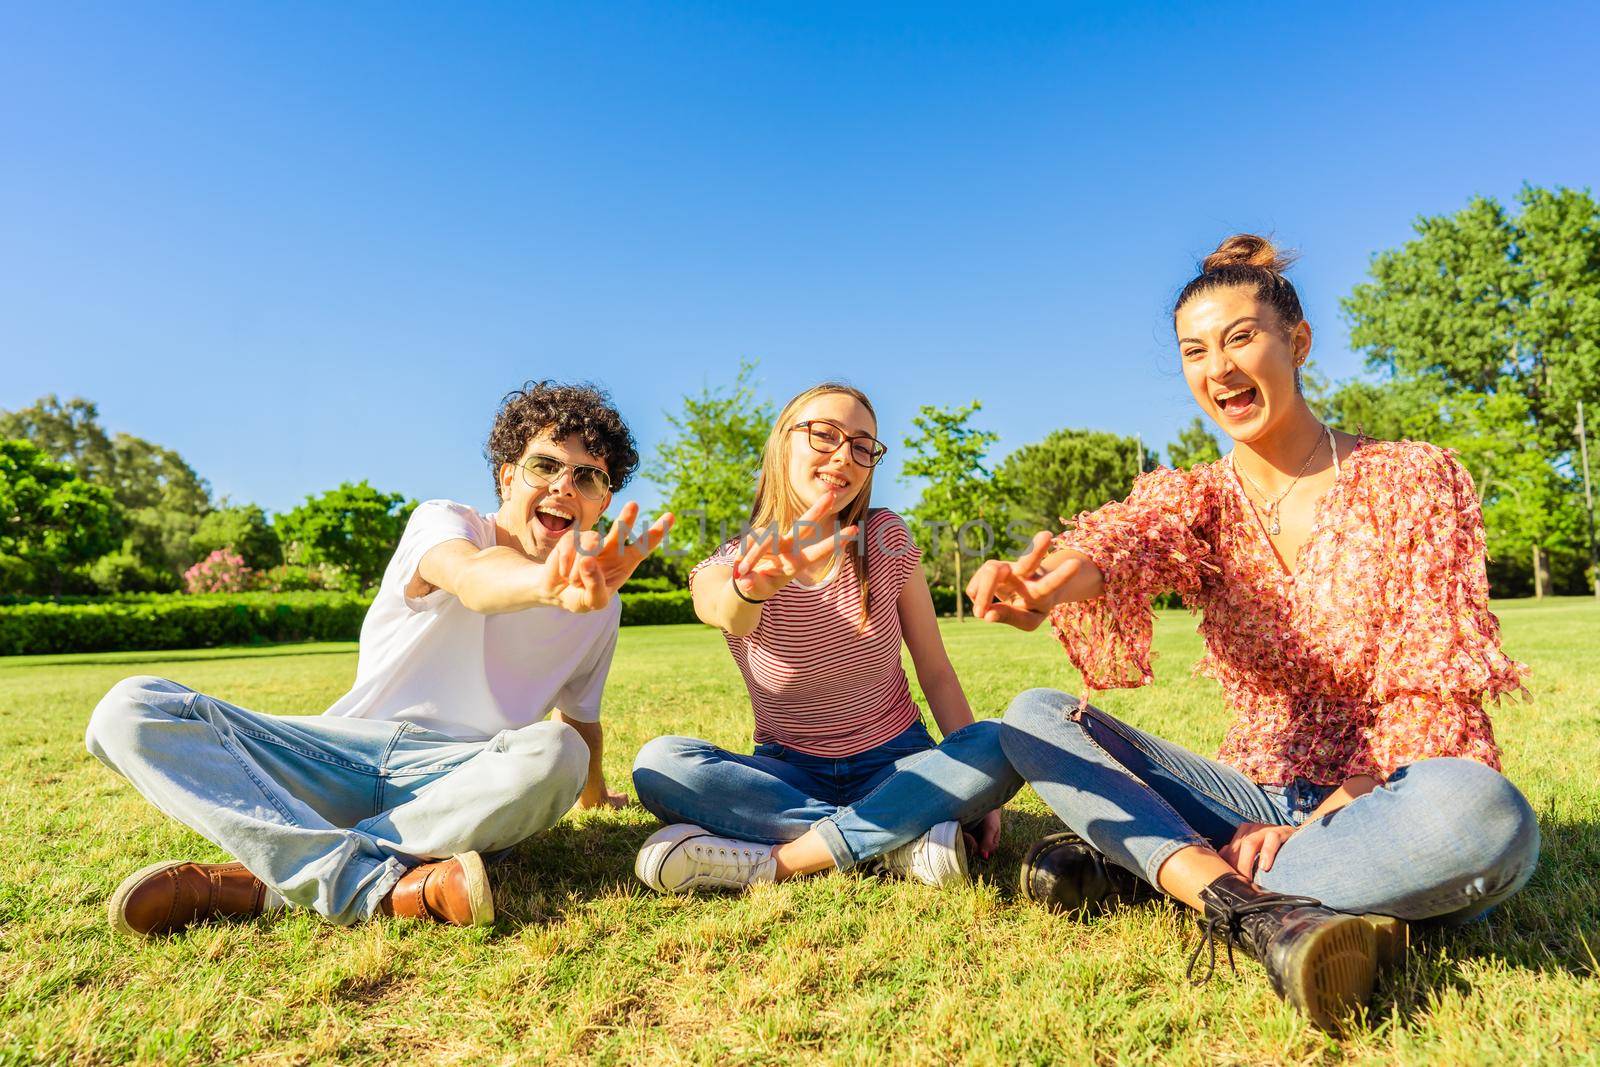 Three young student best friends sitting on grass in city park showing victory sign with two fingers looking at camera. Concept of unity and solidarity in youth age. Happy gen z smiling in nature